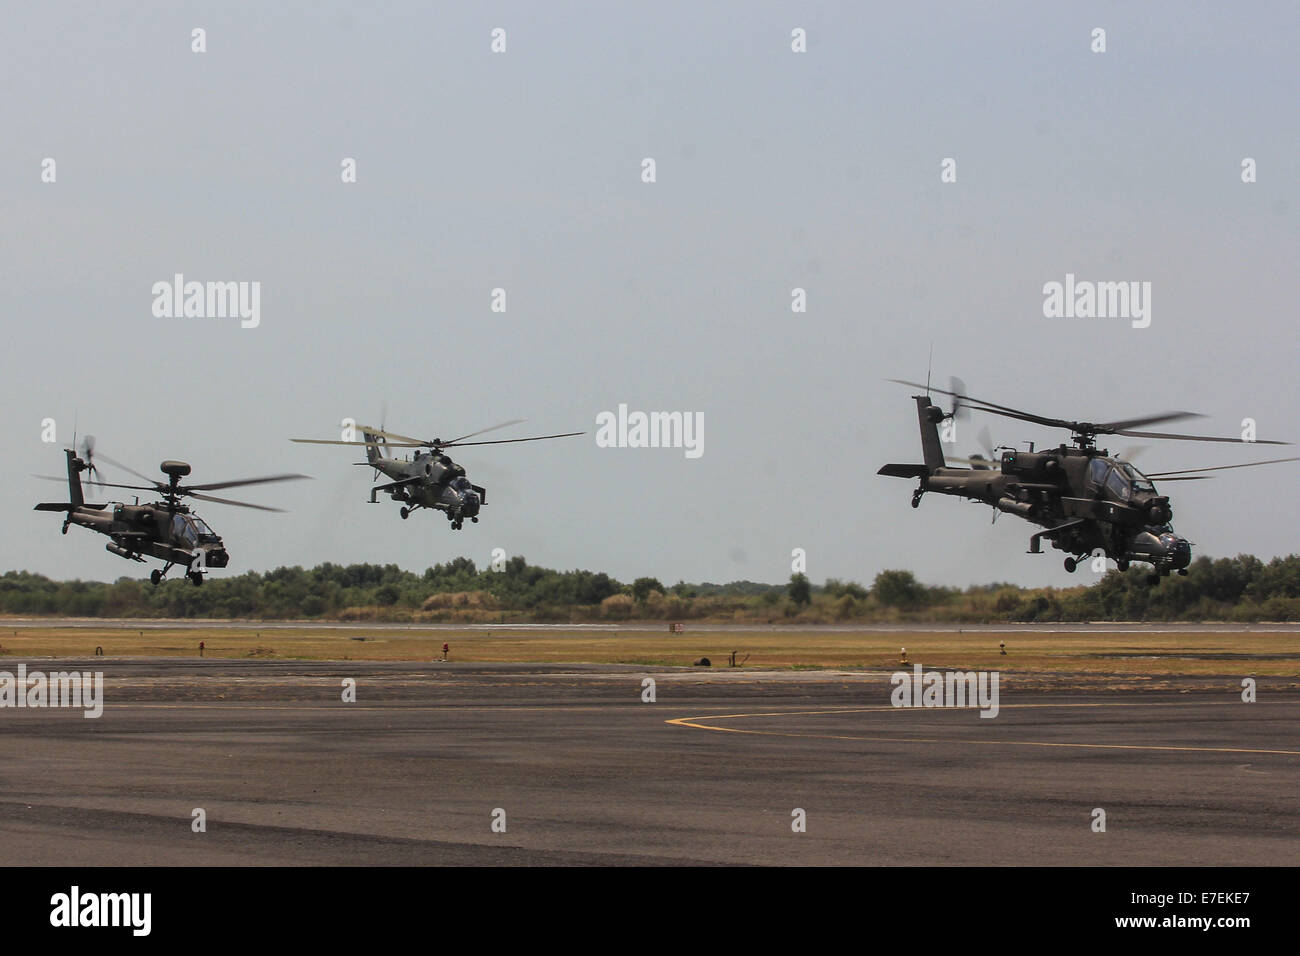 Semarang, Indonesia. 15th Sep, 2014. Military helicopters take part during the 8th Joint Exercise Garuda Shield 2014 at Army Air Base at Ahmad Yani Airport in Semarang, Central Java, Indonesia. Garuda Shield is the password for the joint exercise conducted by the Indonesian Army and the US Army and took place from 01 September to 29 September 2014 in Semarang and Asembagus, Situbondo, Indonesia. Credit:  WF Sihardian /Pacific Press/Alamy Live News Stock Photo